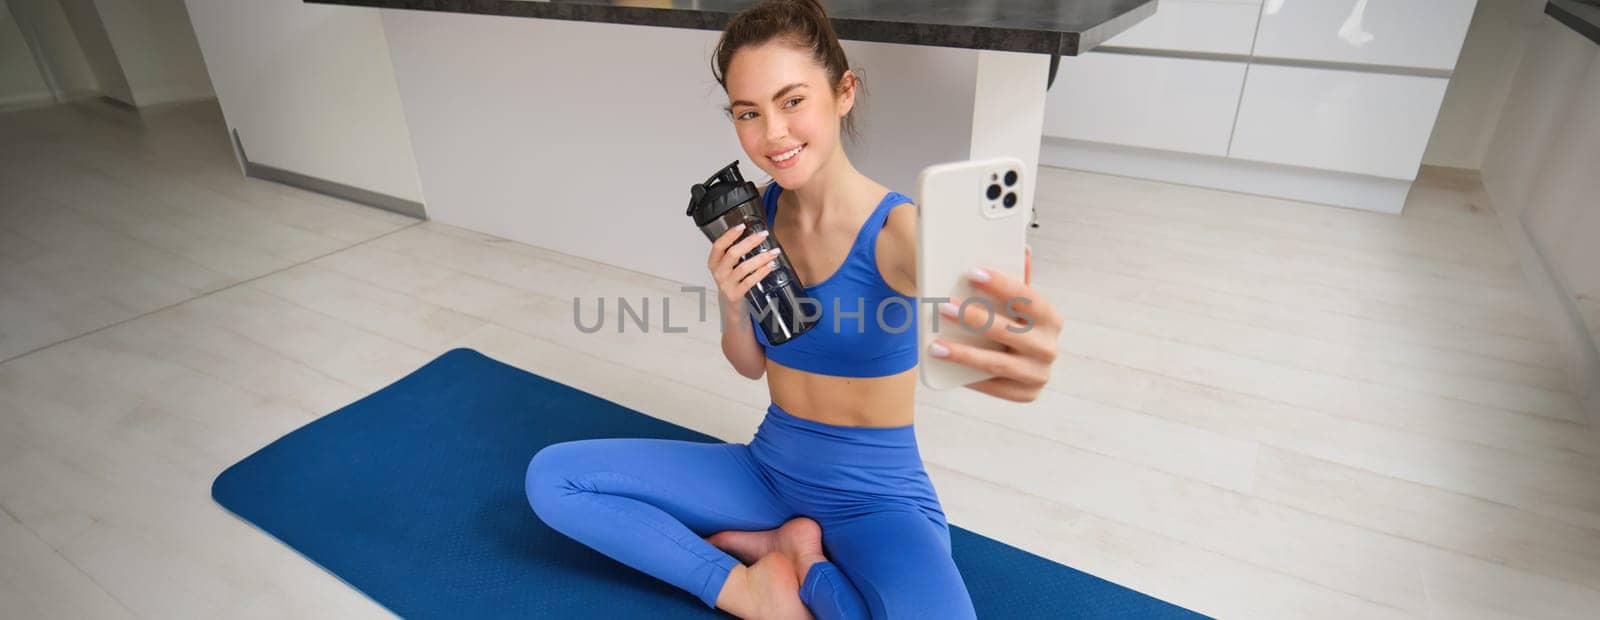 Portrait of woman taking selfie with water bottle, fitness instructor shows her exercises, doing workout from home, on rubber blue yoga mat, wearing sportswear by Benzoix